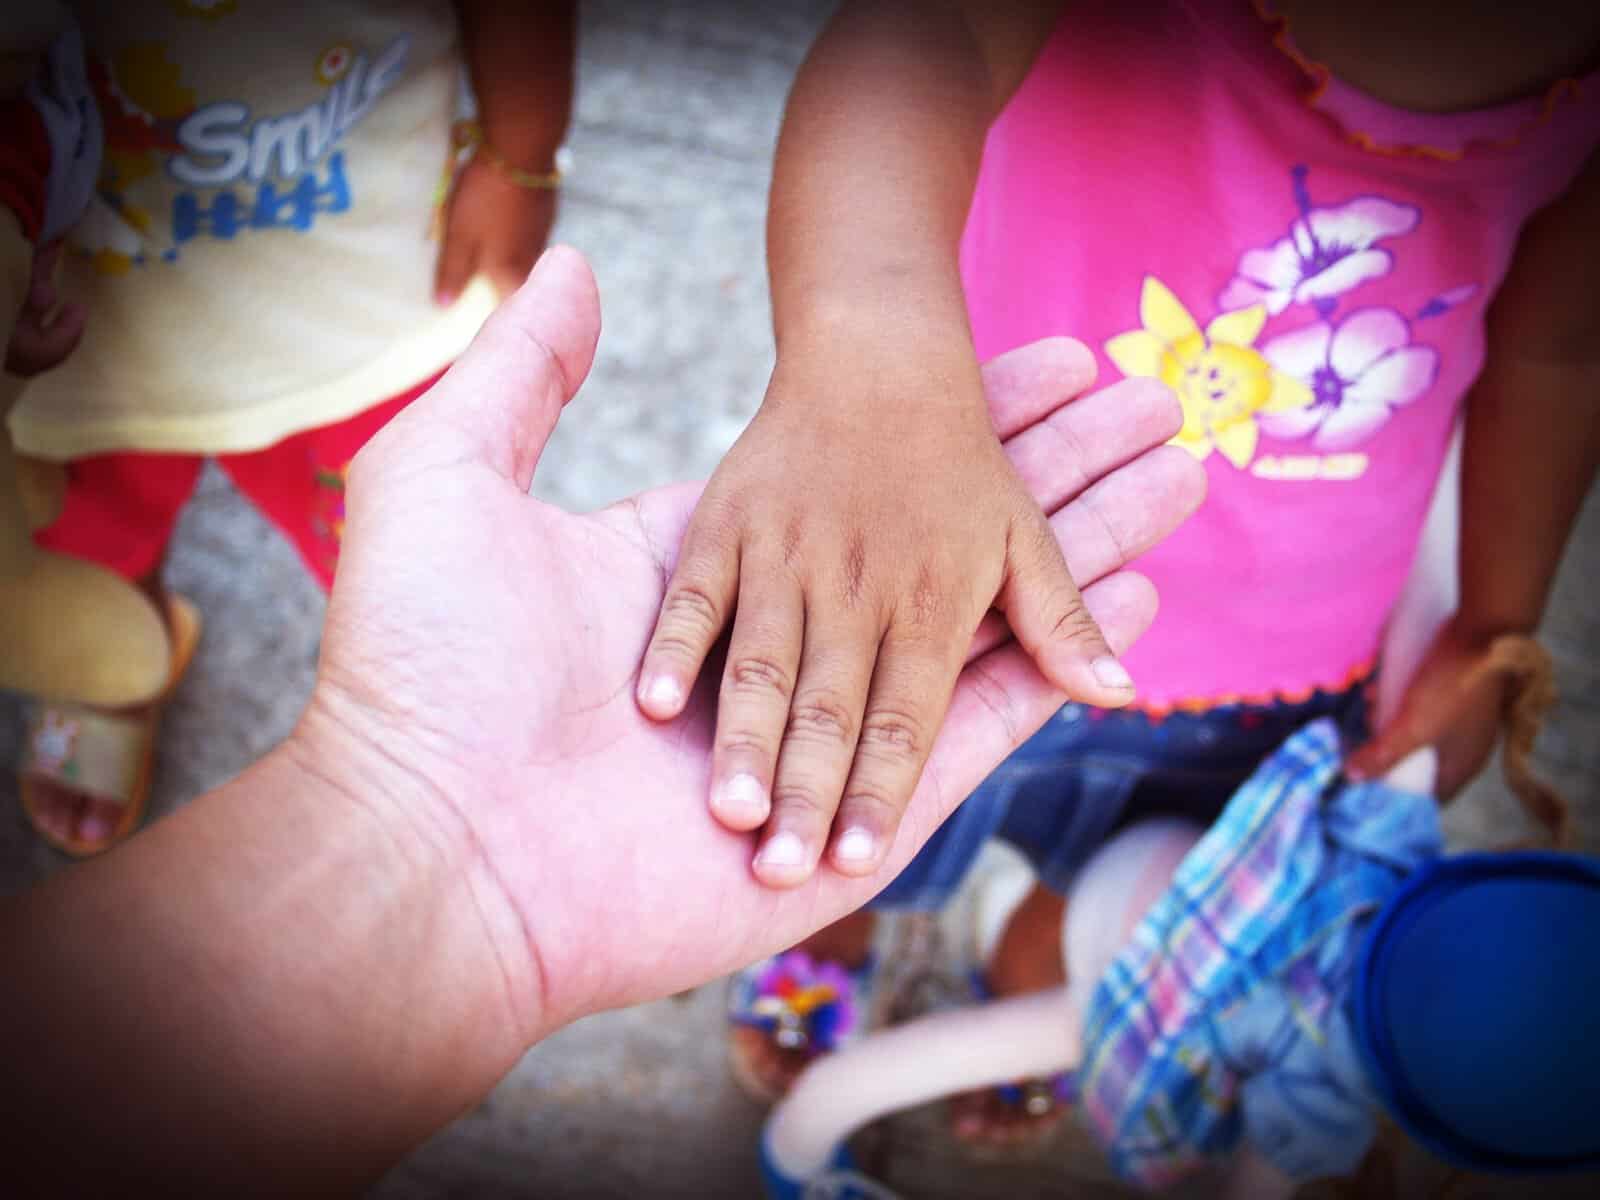 A toddler with brown skin rests their hand on the palm of a person with light skin.